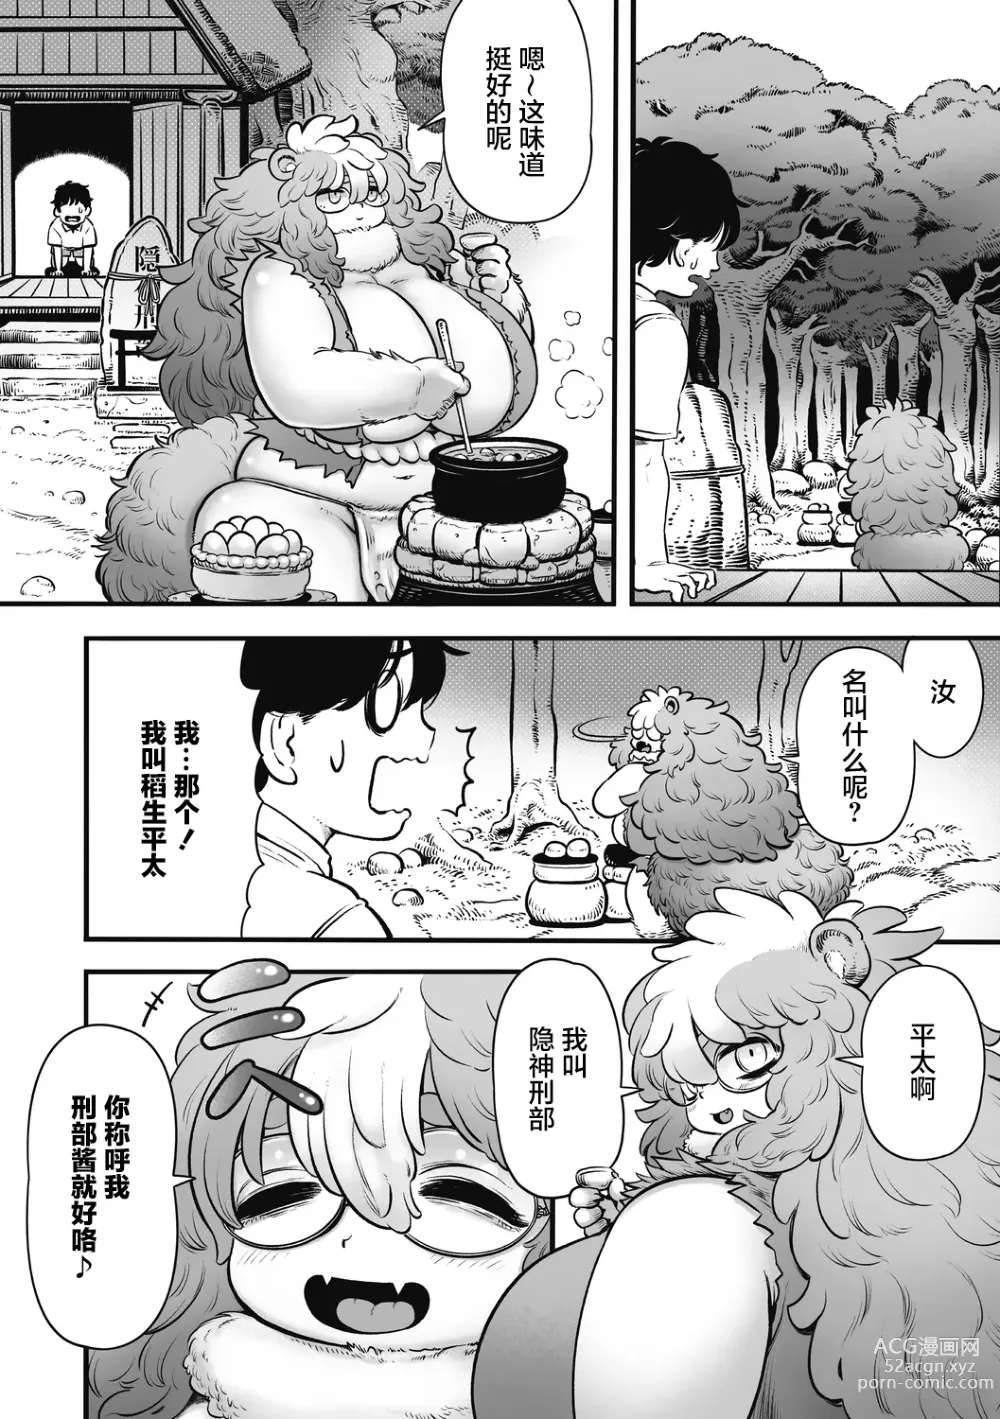 Page 7 of doujinshi 刑部河田ひより（肉包汉化组）（Chinese）